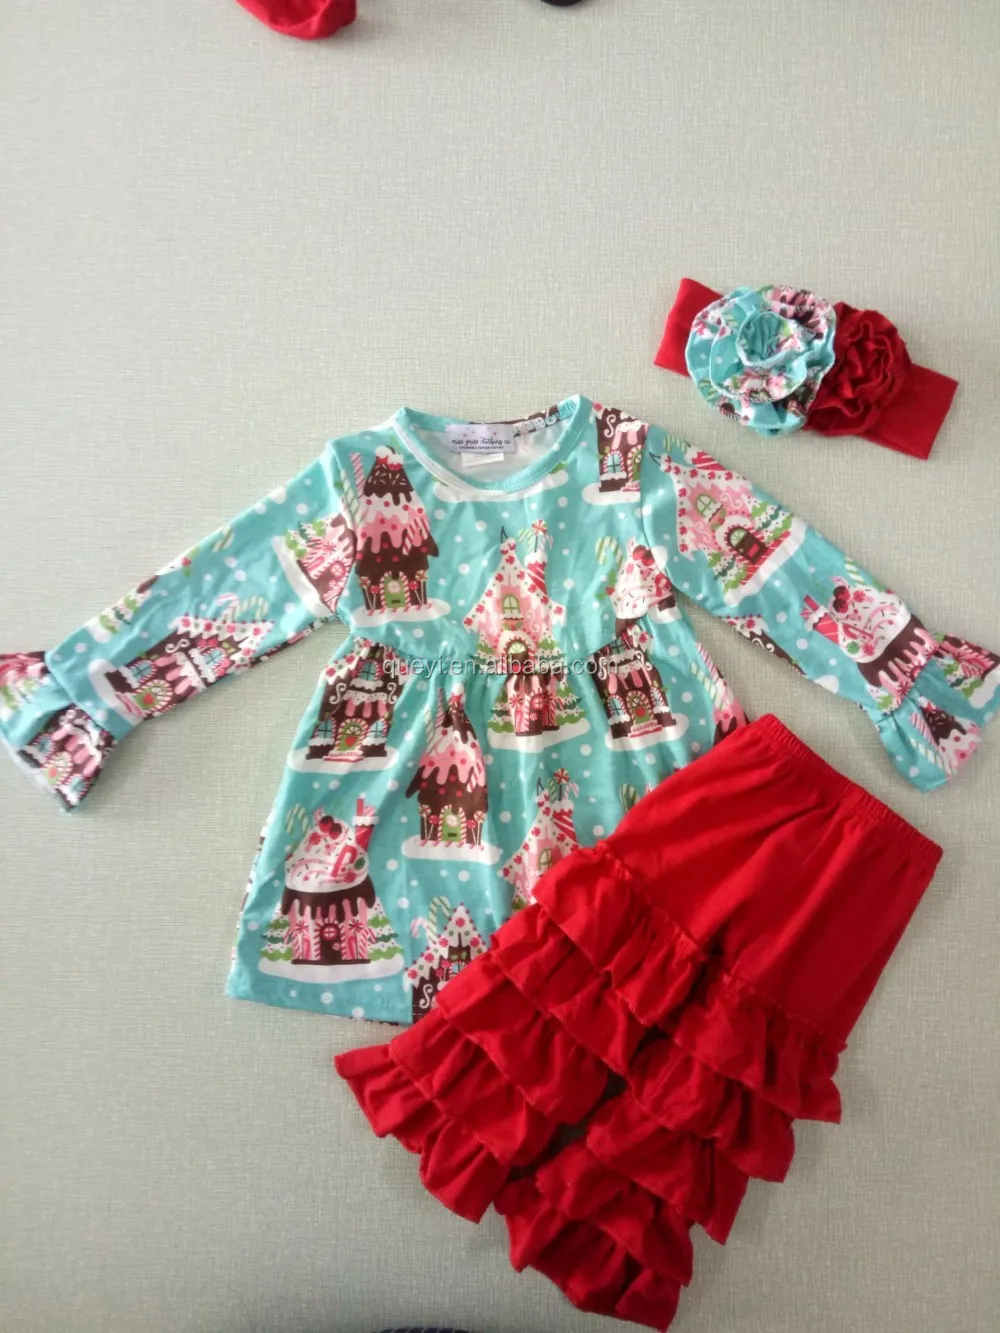 Wholesale Baby Clothes For Screen Printing Agbu Hye Geen - gucci shirt code for roblox agbu hye geen